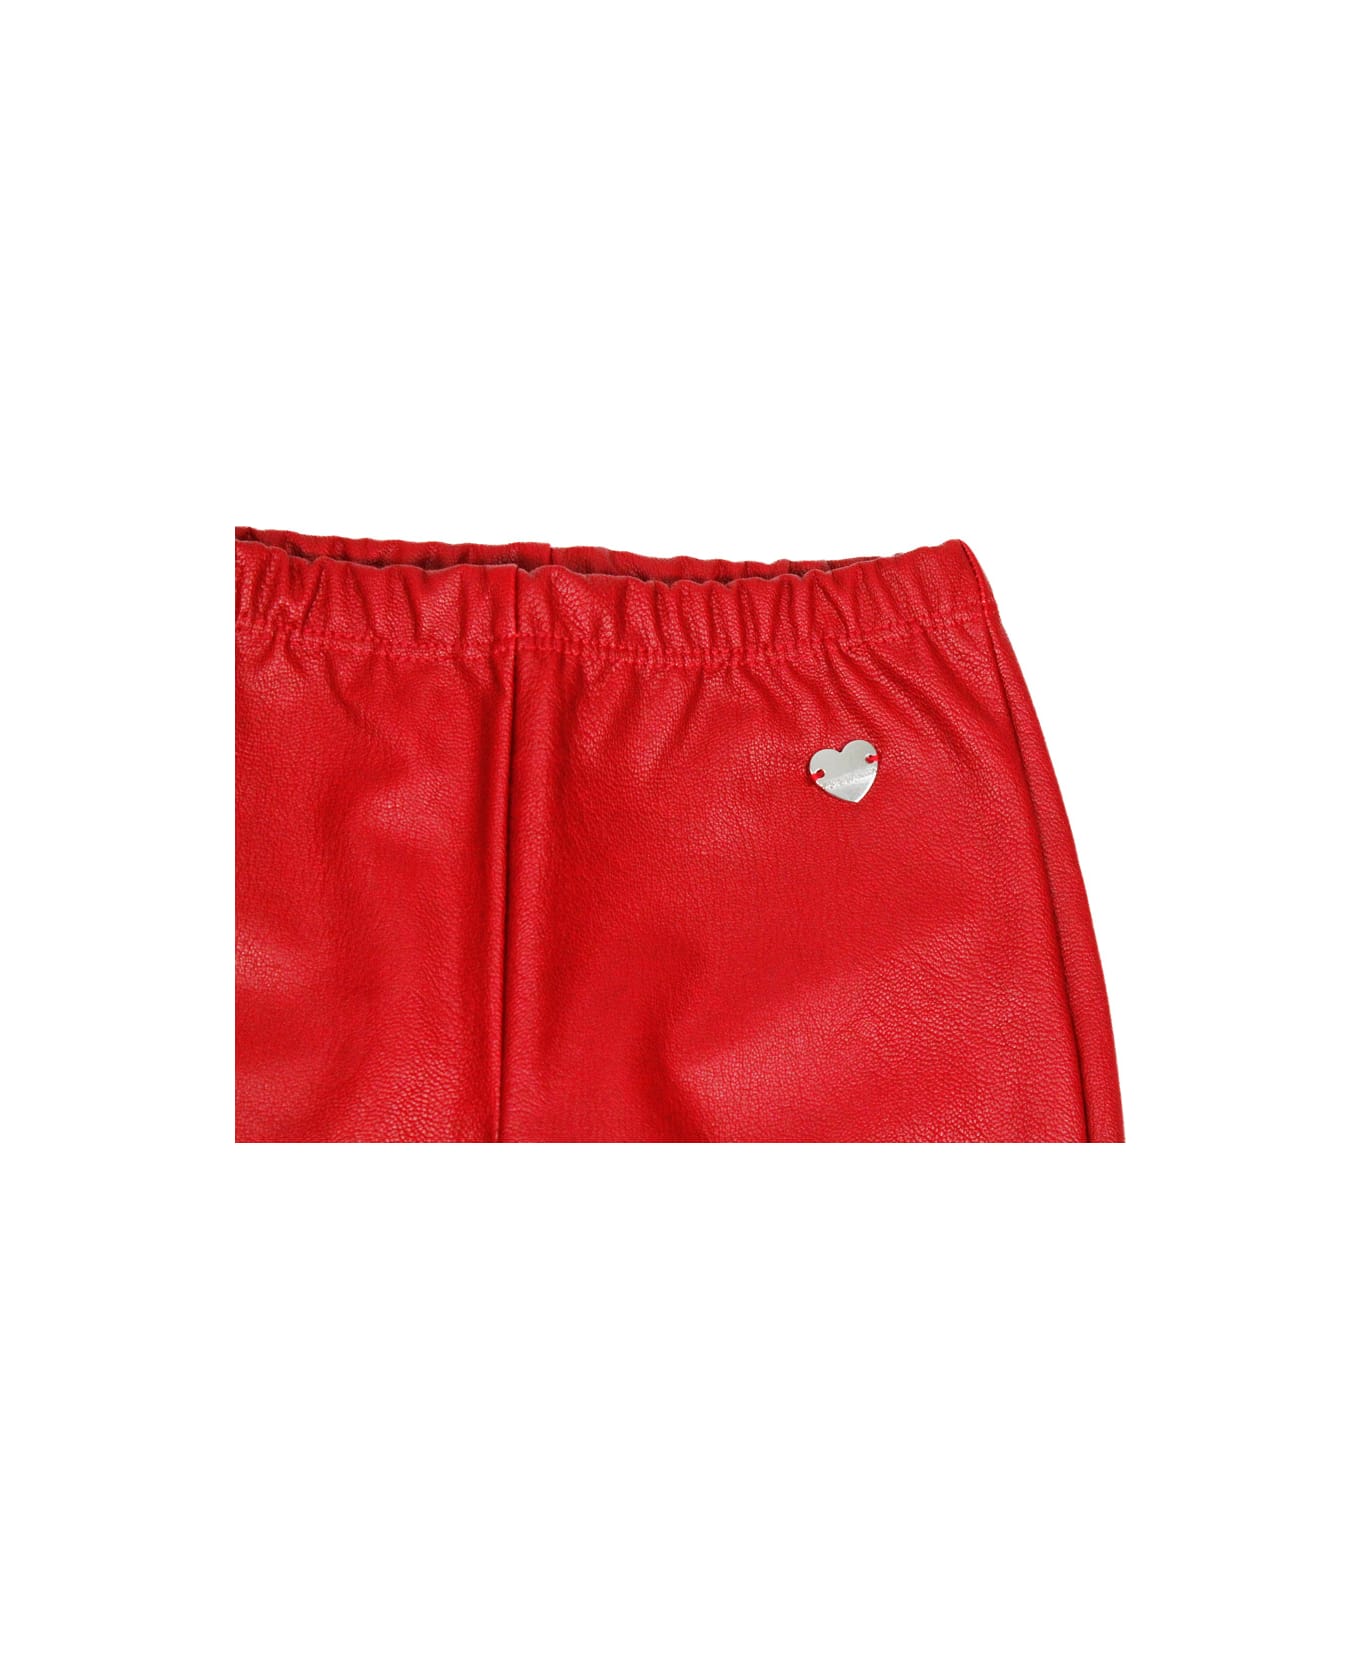 Monnalisa Leggings Trousers In Super Stretch Eco-leather With Applied Metal Heart - Red ボトムス